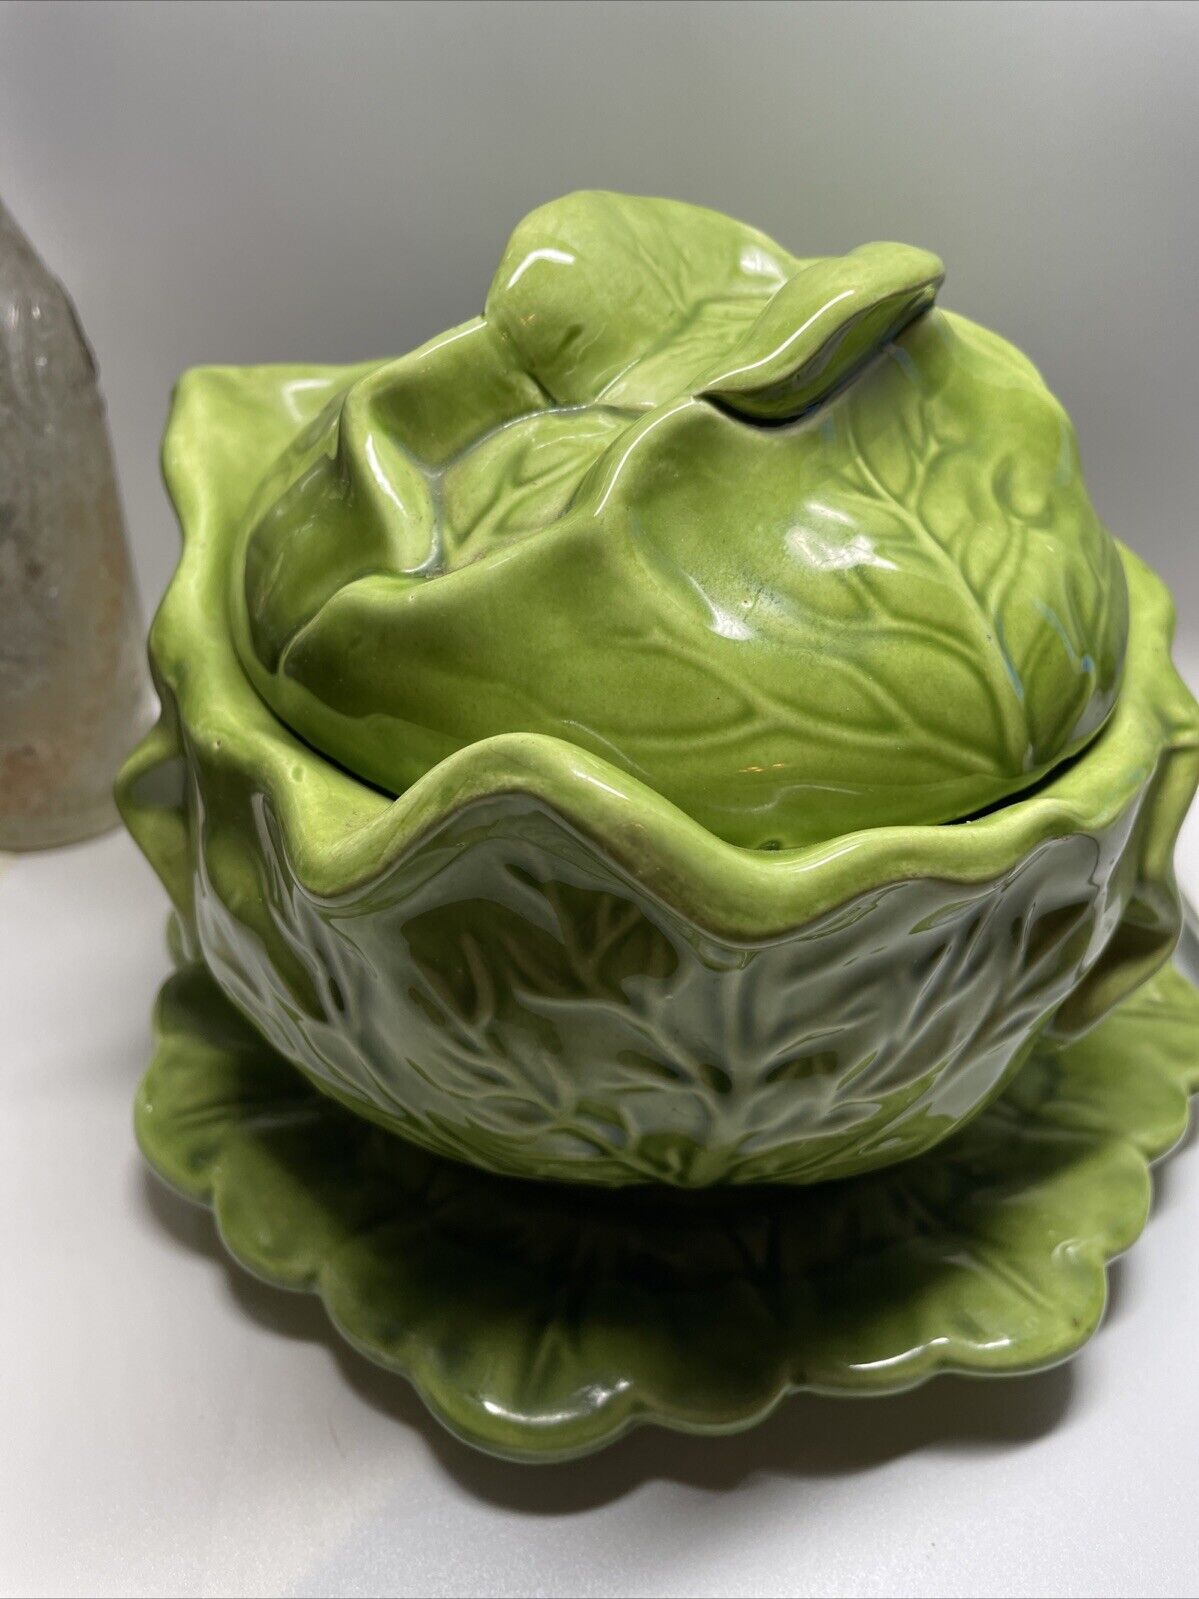 Vtg 1950's Holland Mold 3-Piece Green Lettuce/Cabbage-Shaped Covered Bowl/Tureen